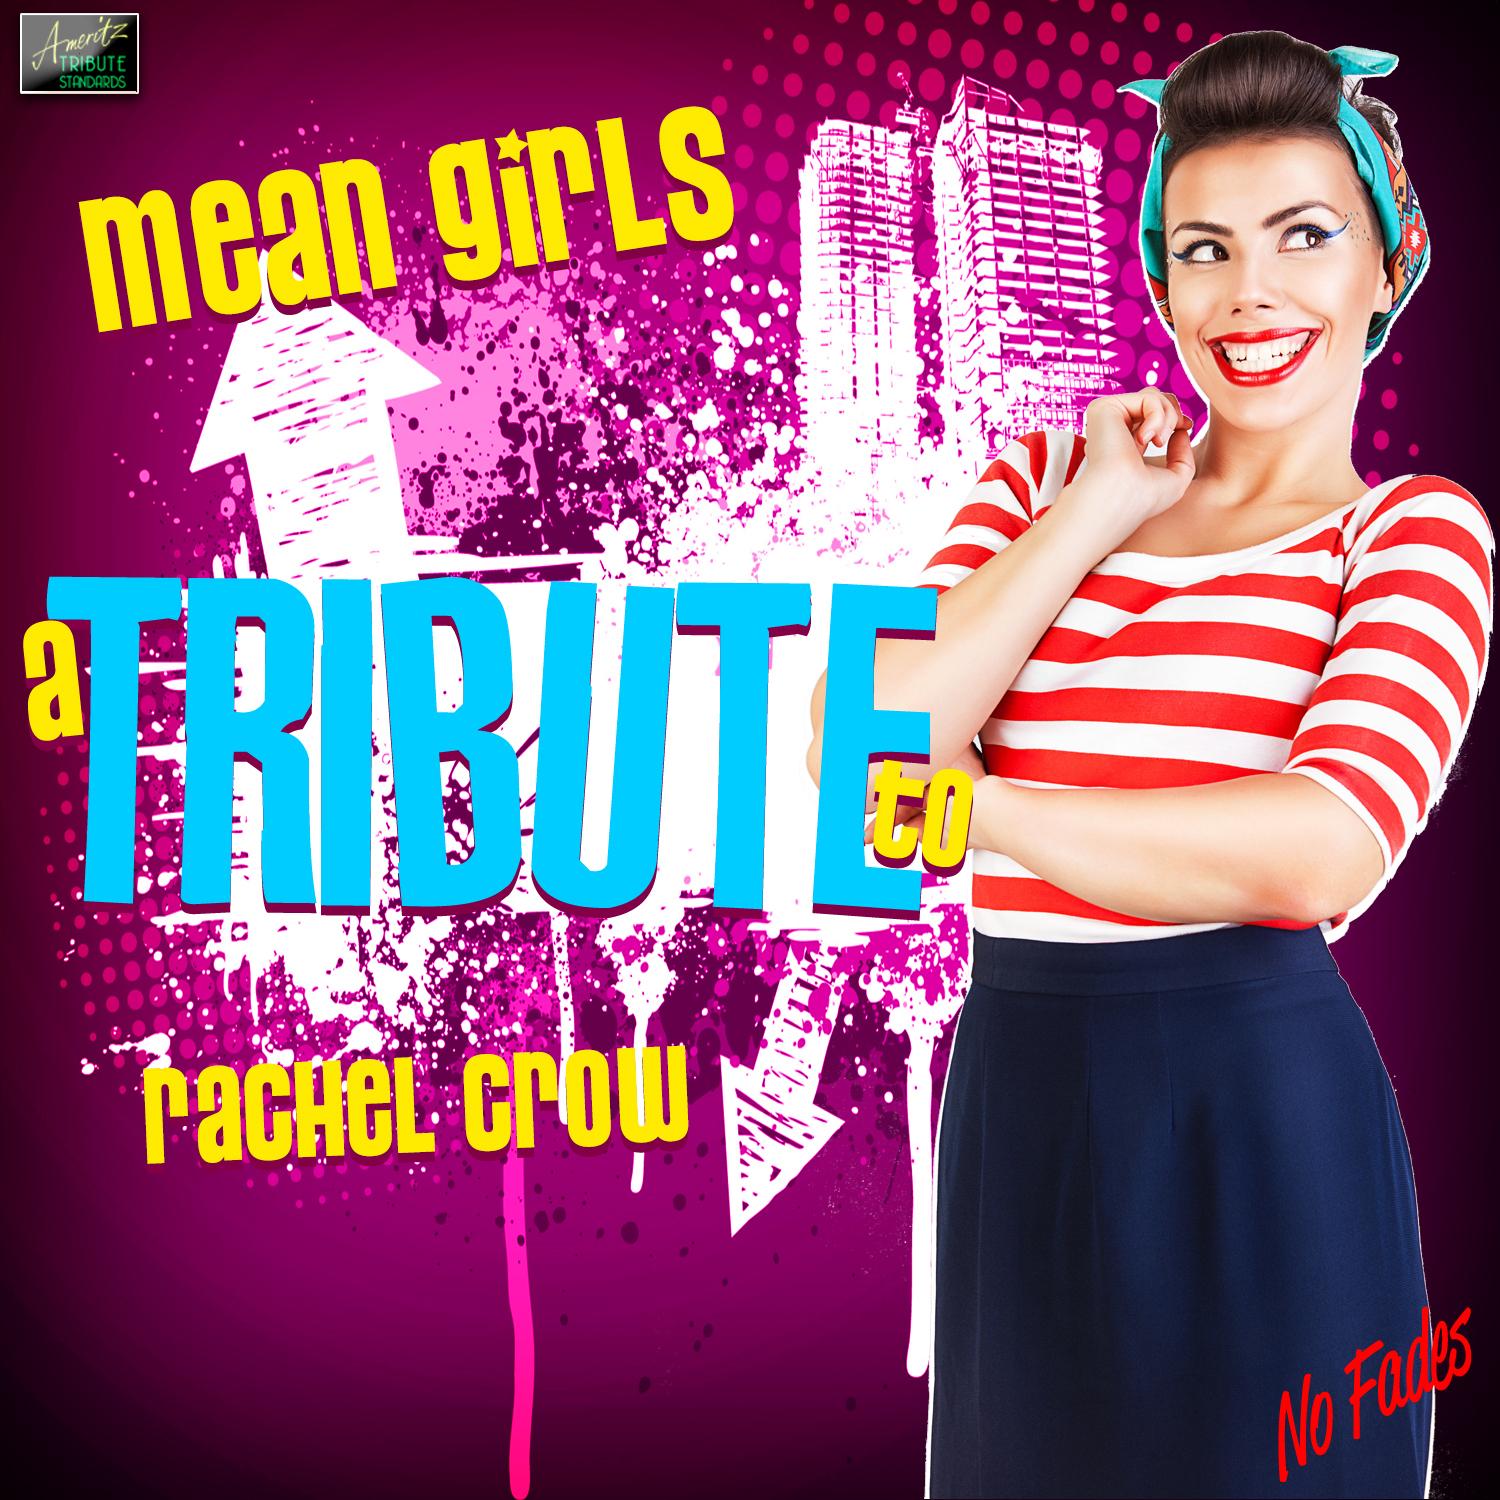 Mean Girls (A Tribute to Rachel Crow)